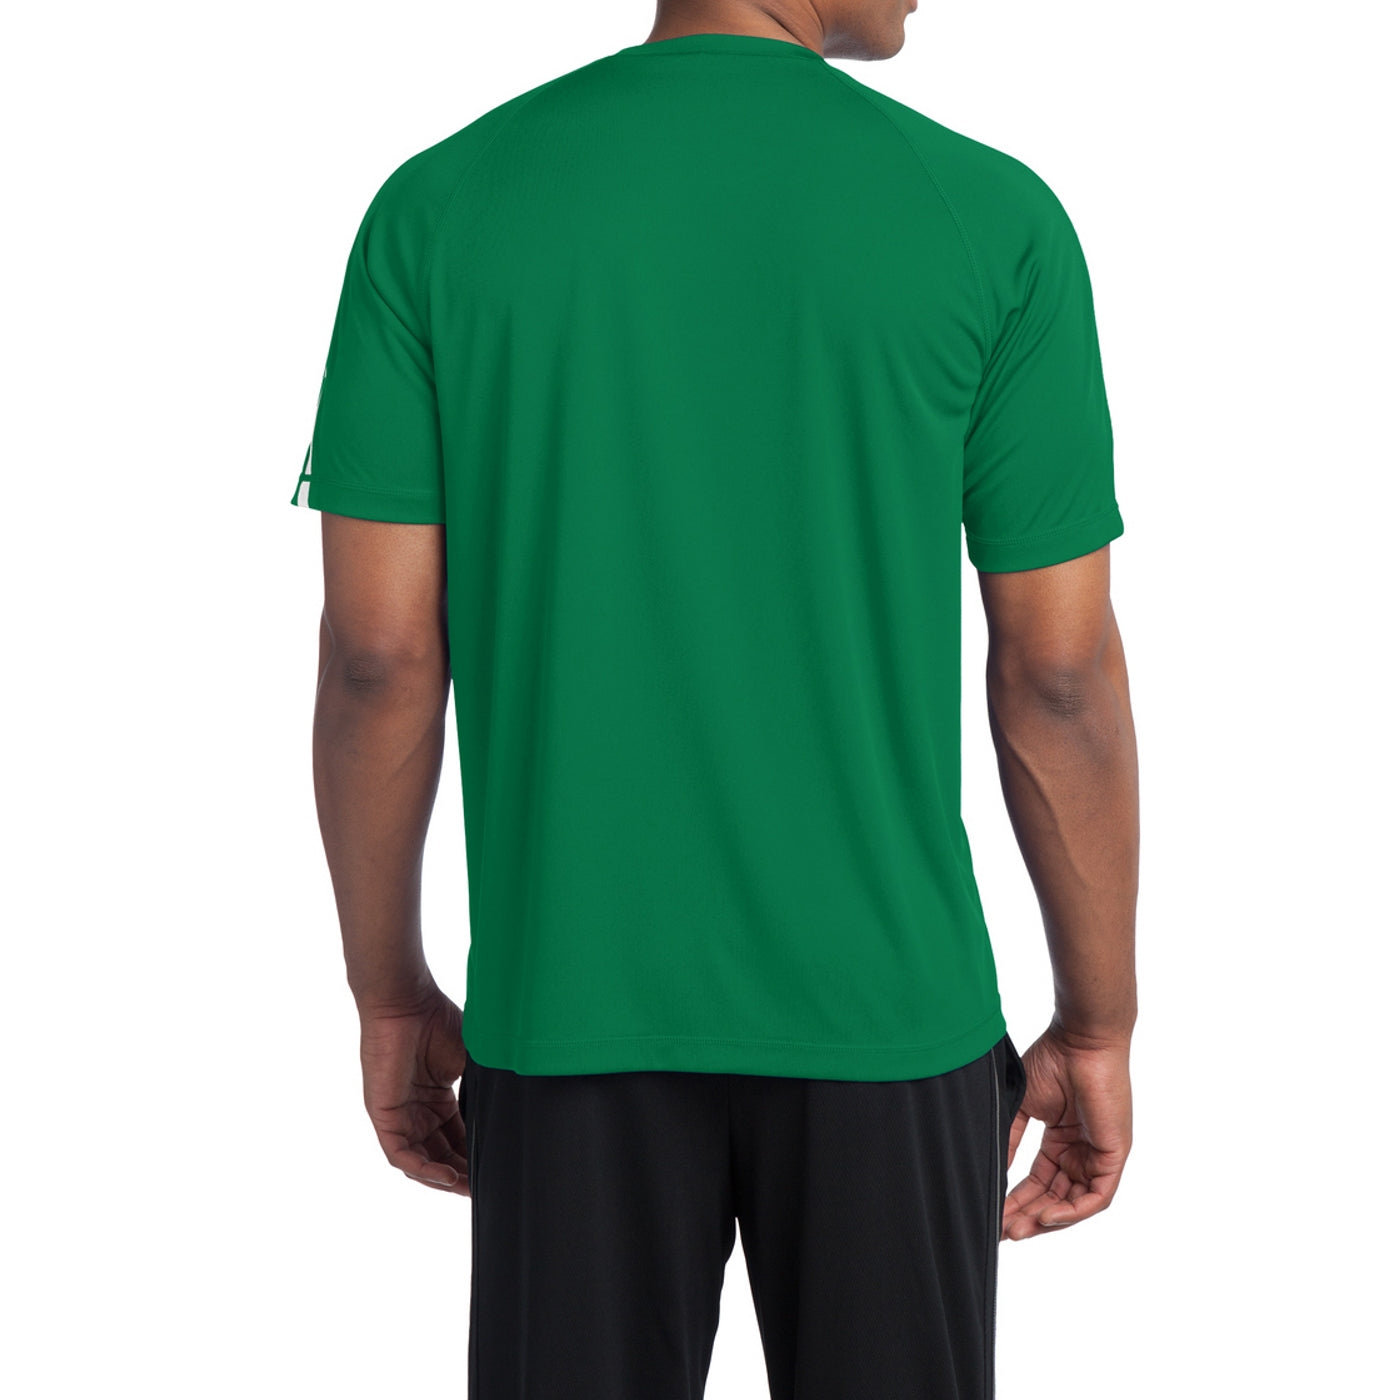 Men's Colorblock PosiCharge Competitor Tee - Kelly Green/ White